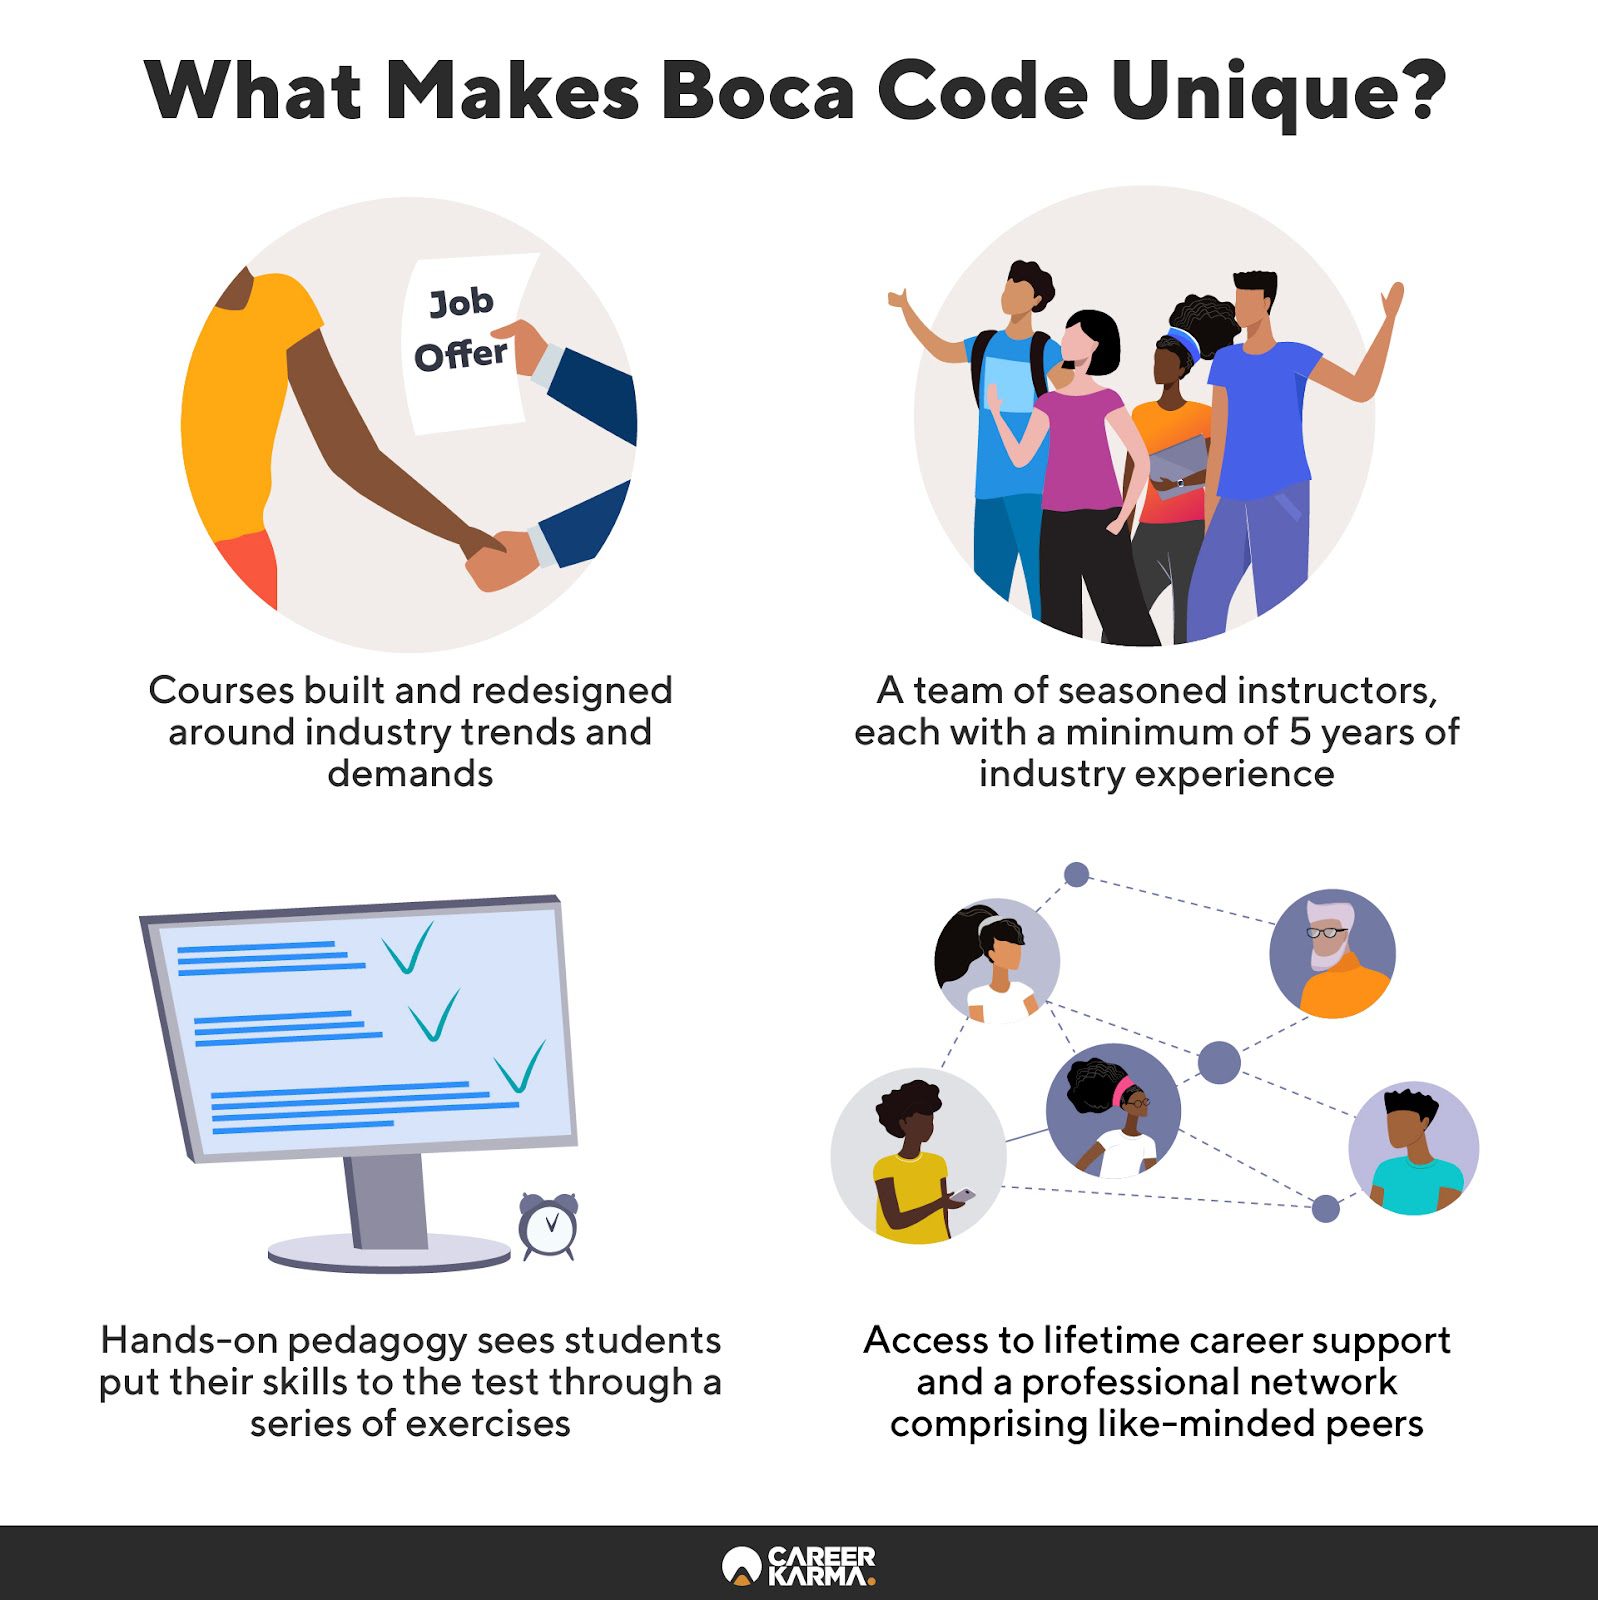 An infographic highlighting the features that make Boca Code unique